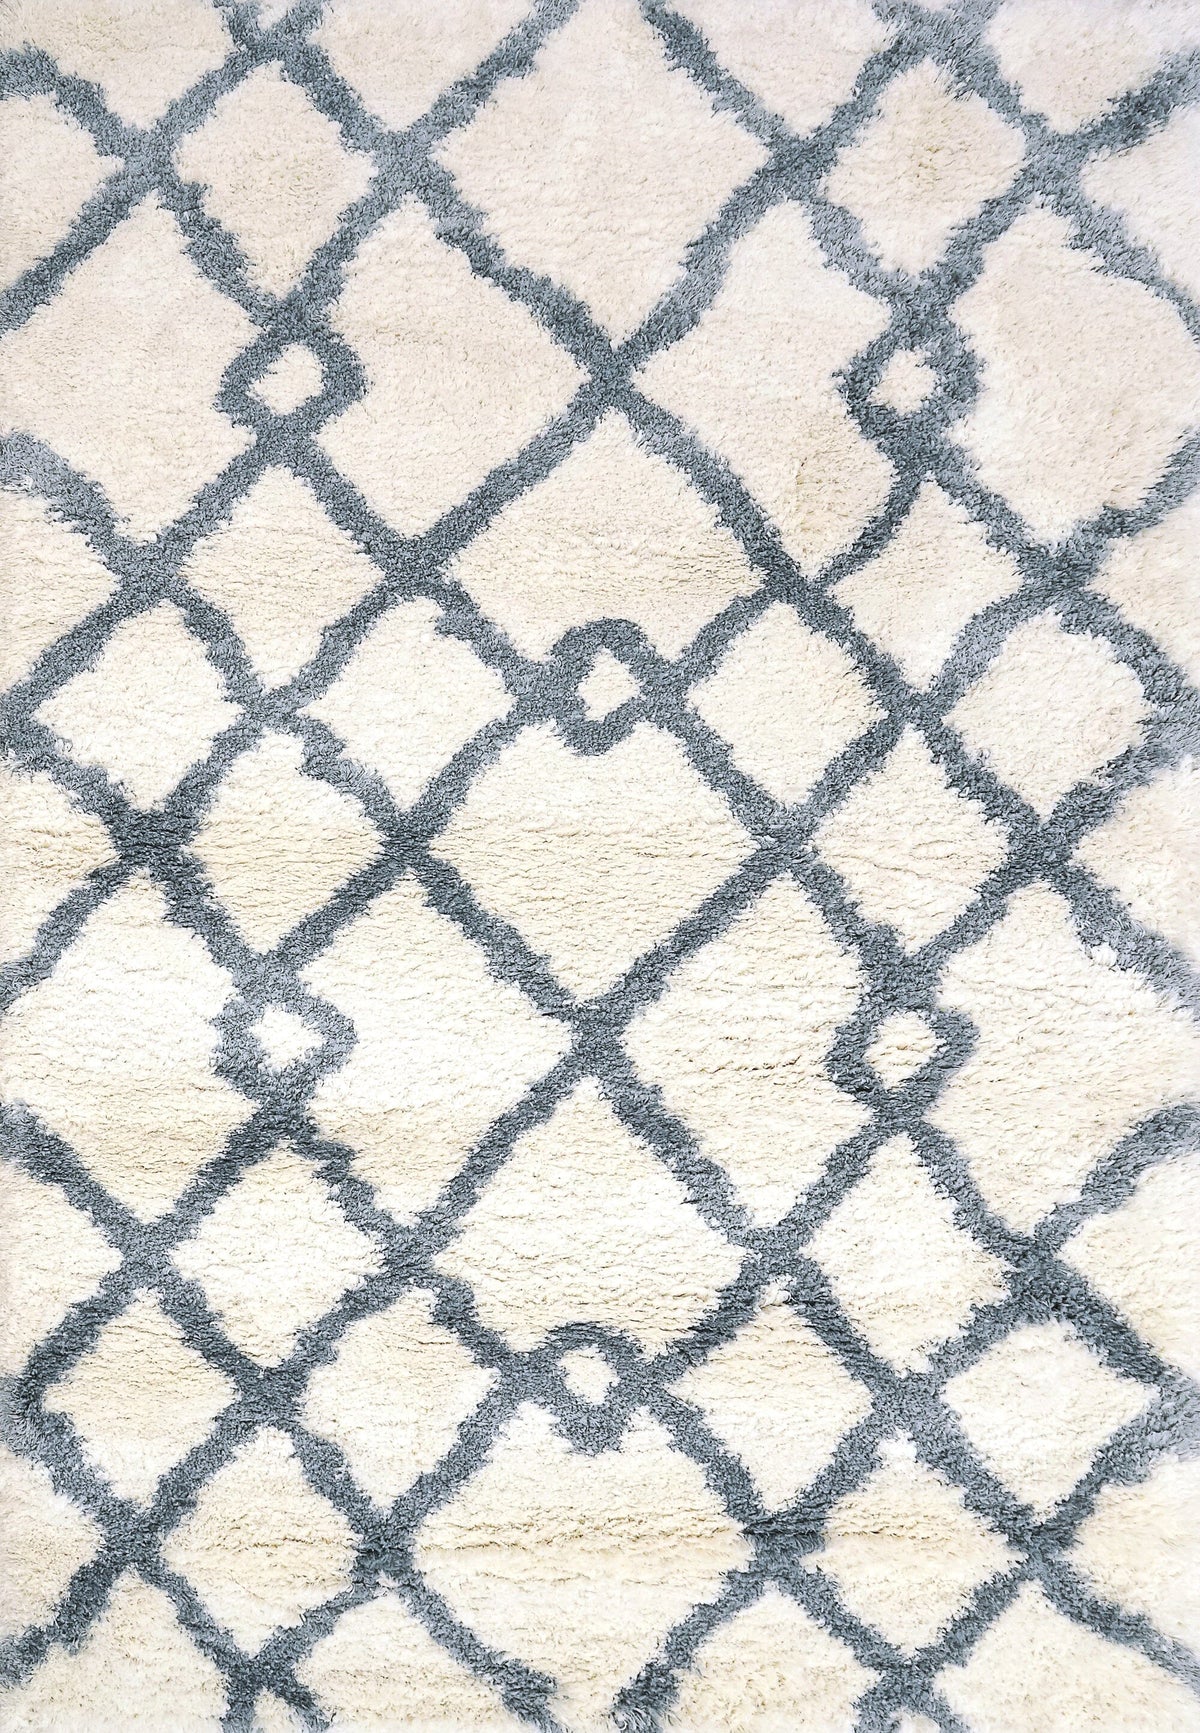 Anne Klein Ivory/Blue The Printed Posh Contemporary Rug Collection